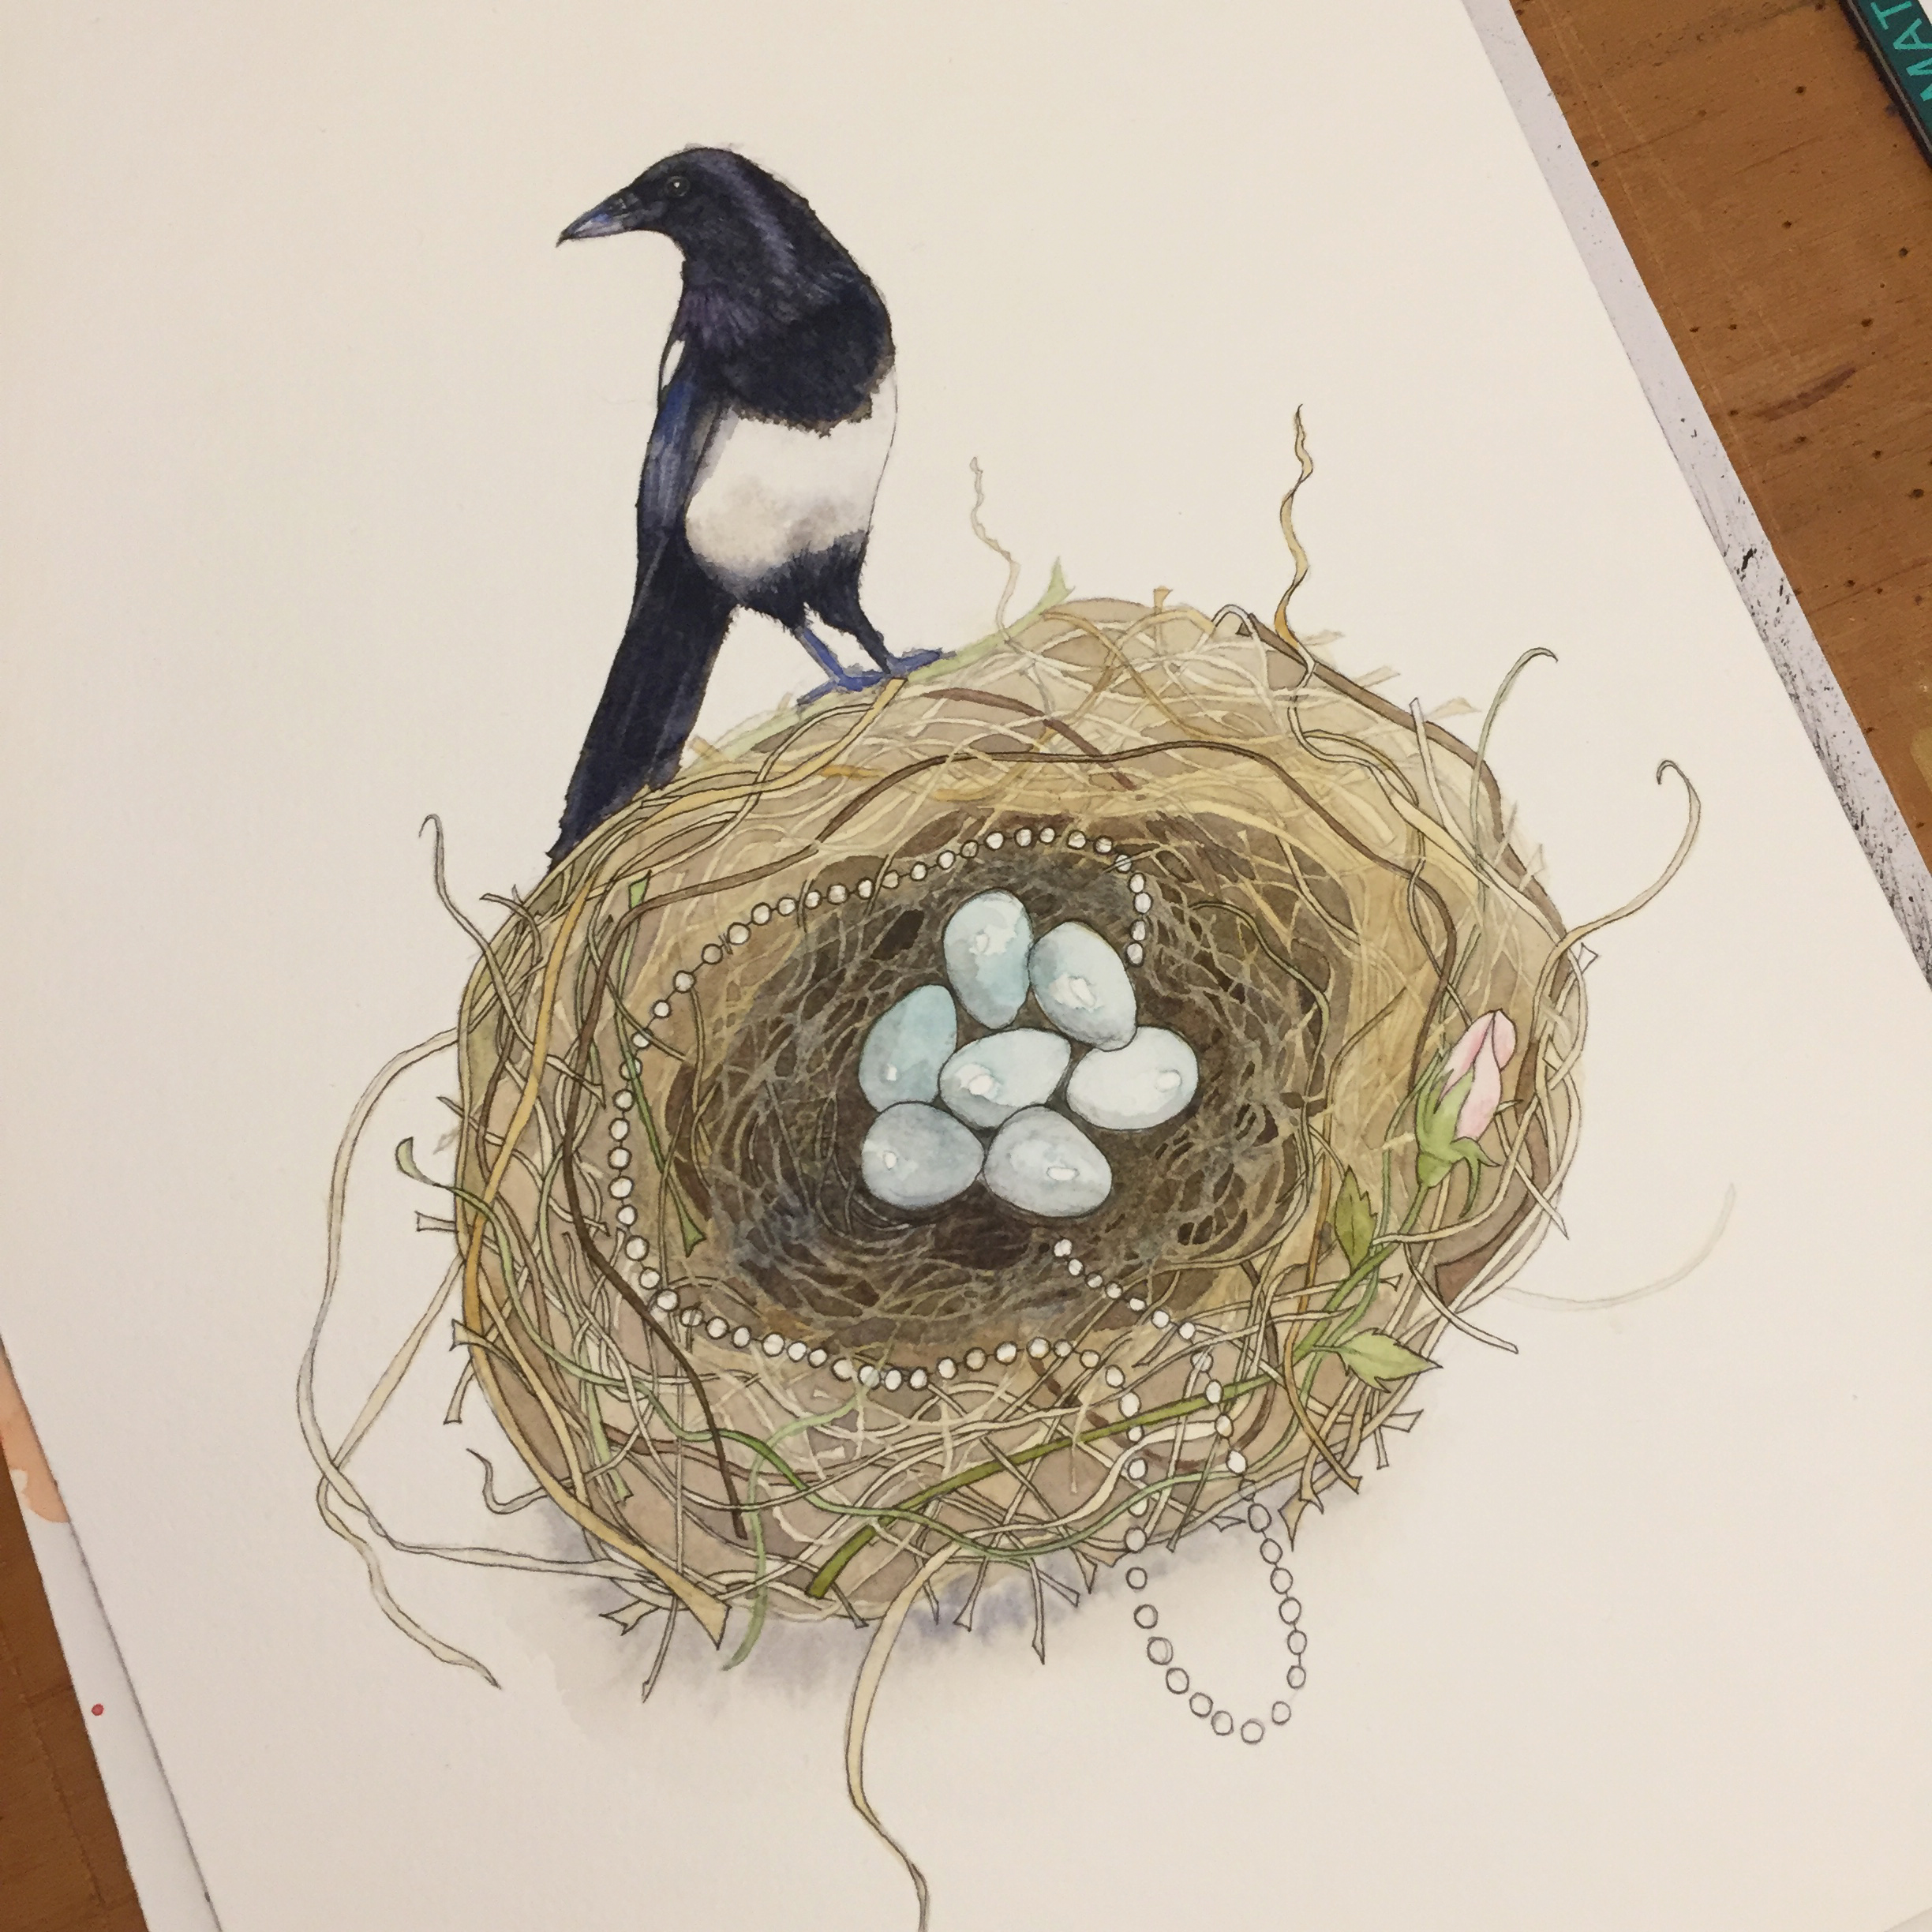 A photograph showing the magpie watercolour painting with the inking half finished